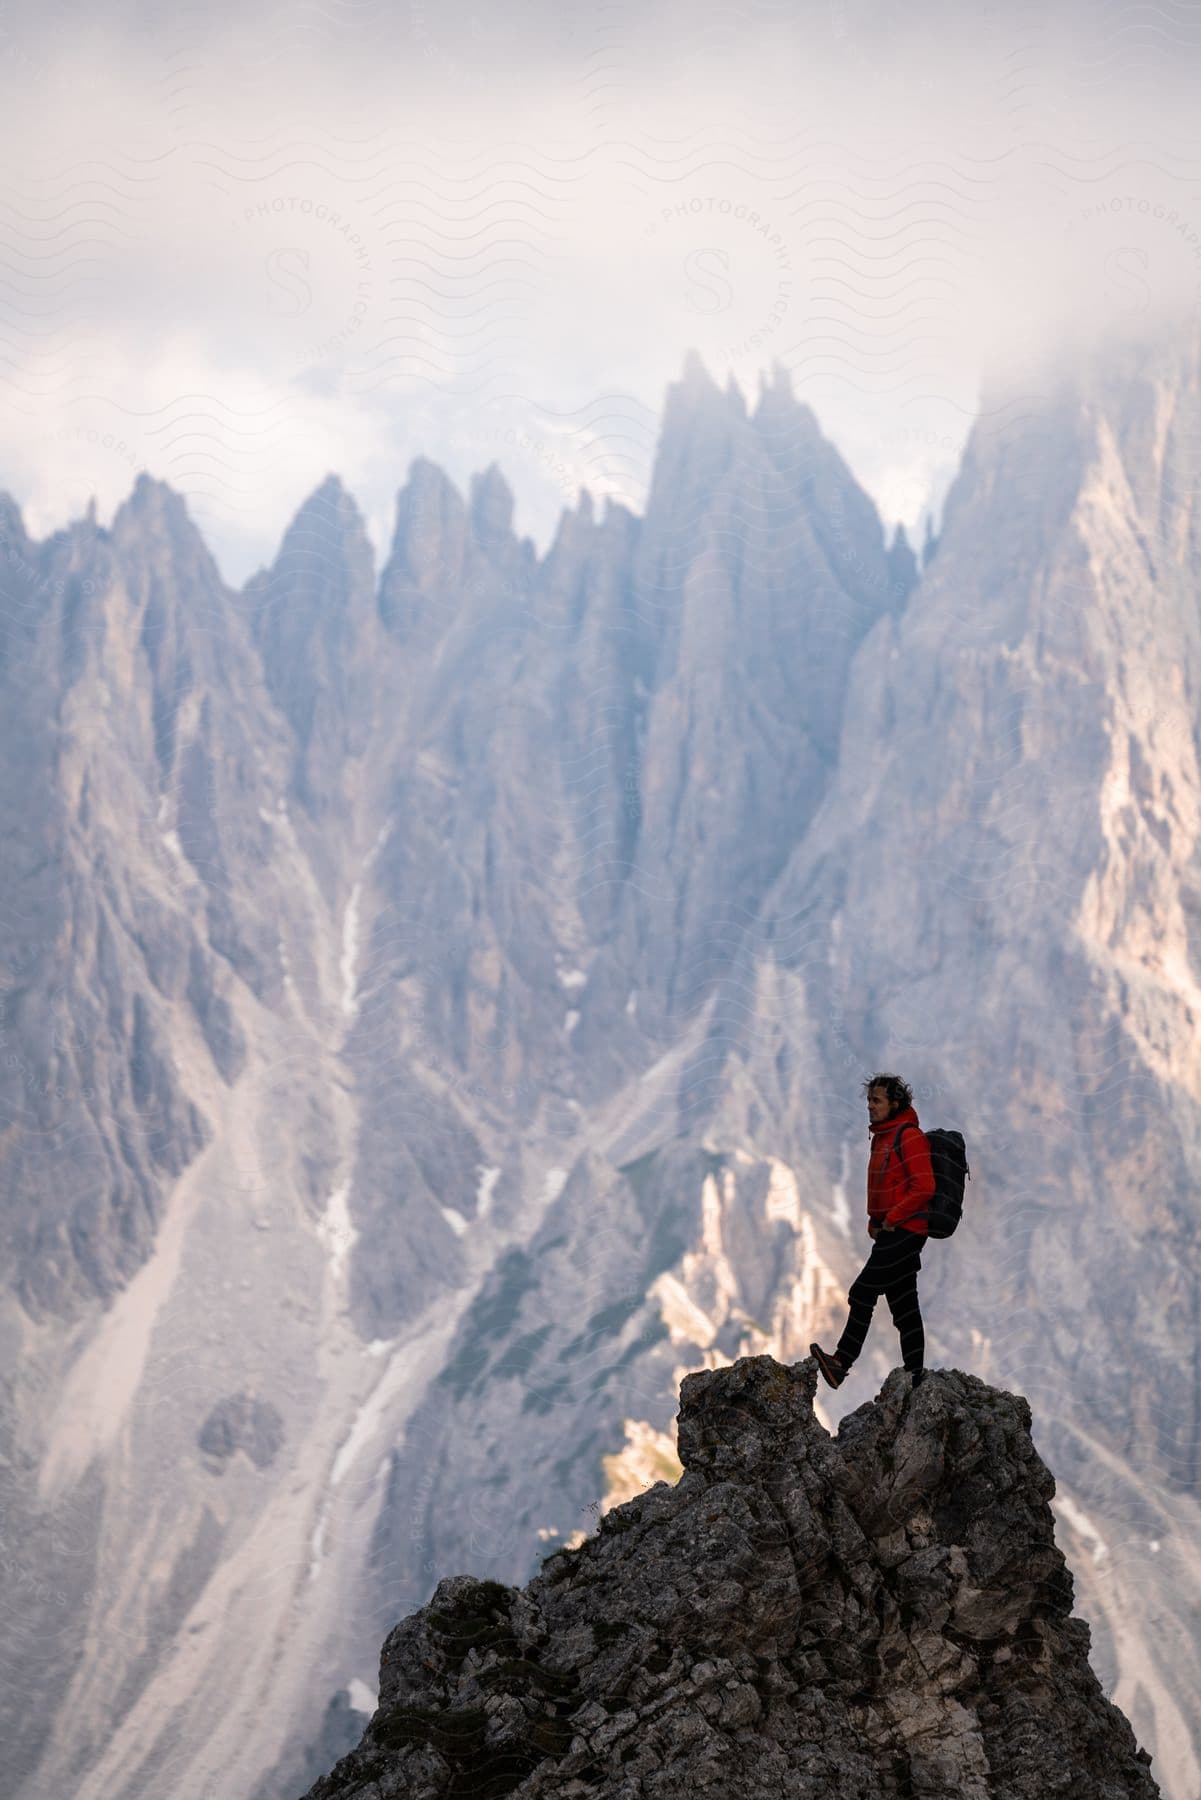 Person standing on a rocky peak with jagged mountain range in the background, wearing a red jacket and carrying a backpack.